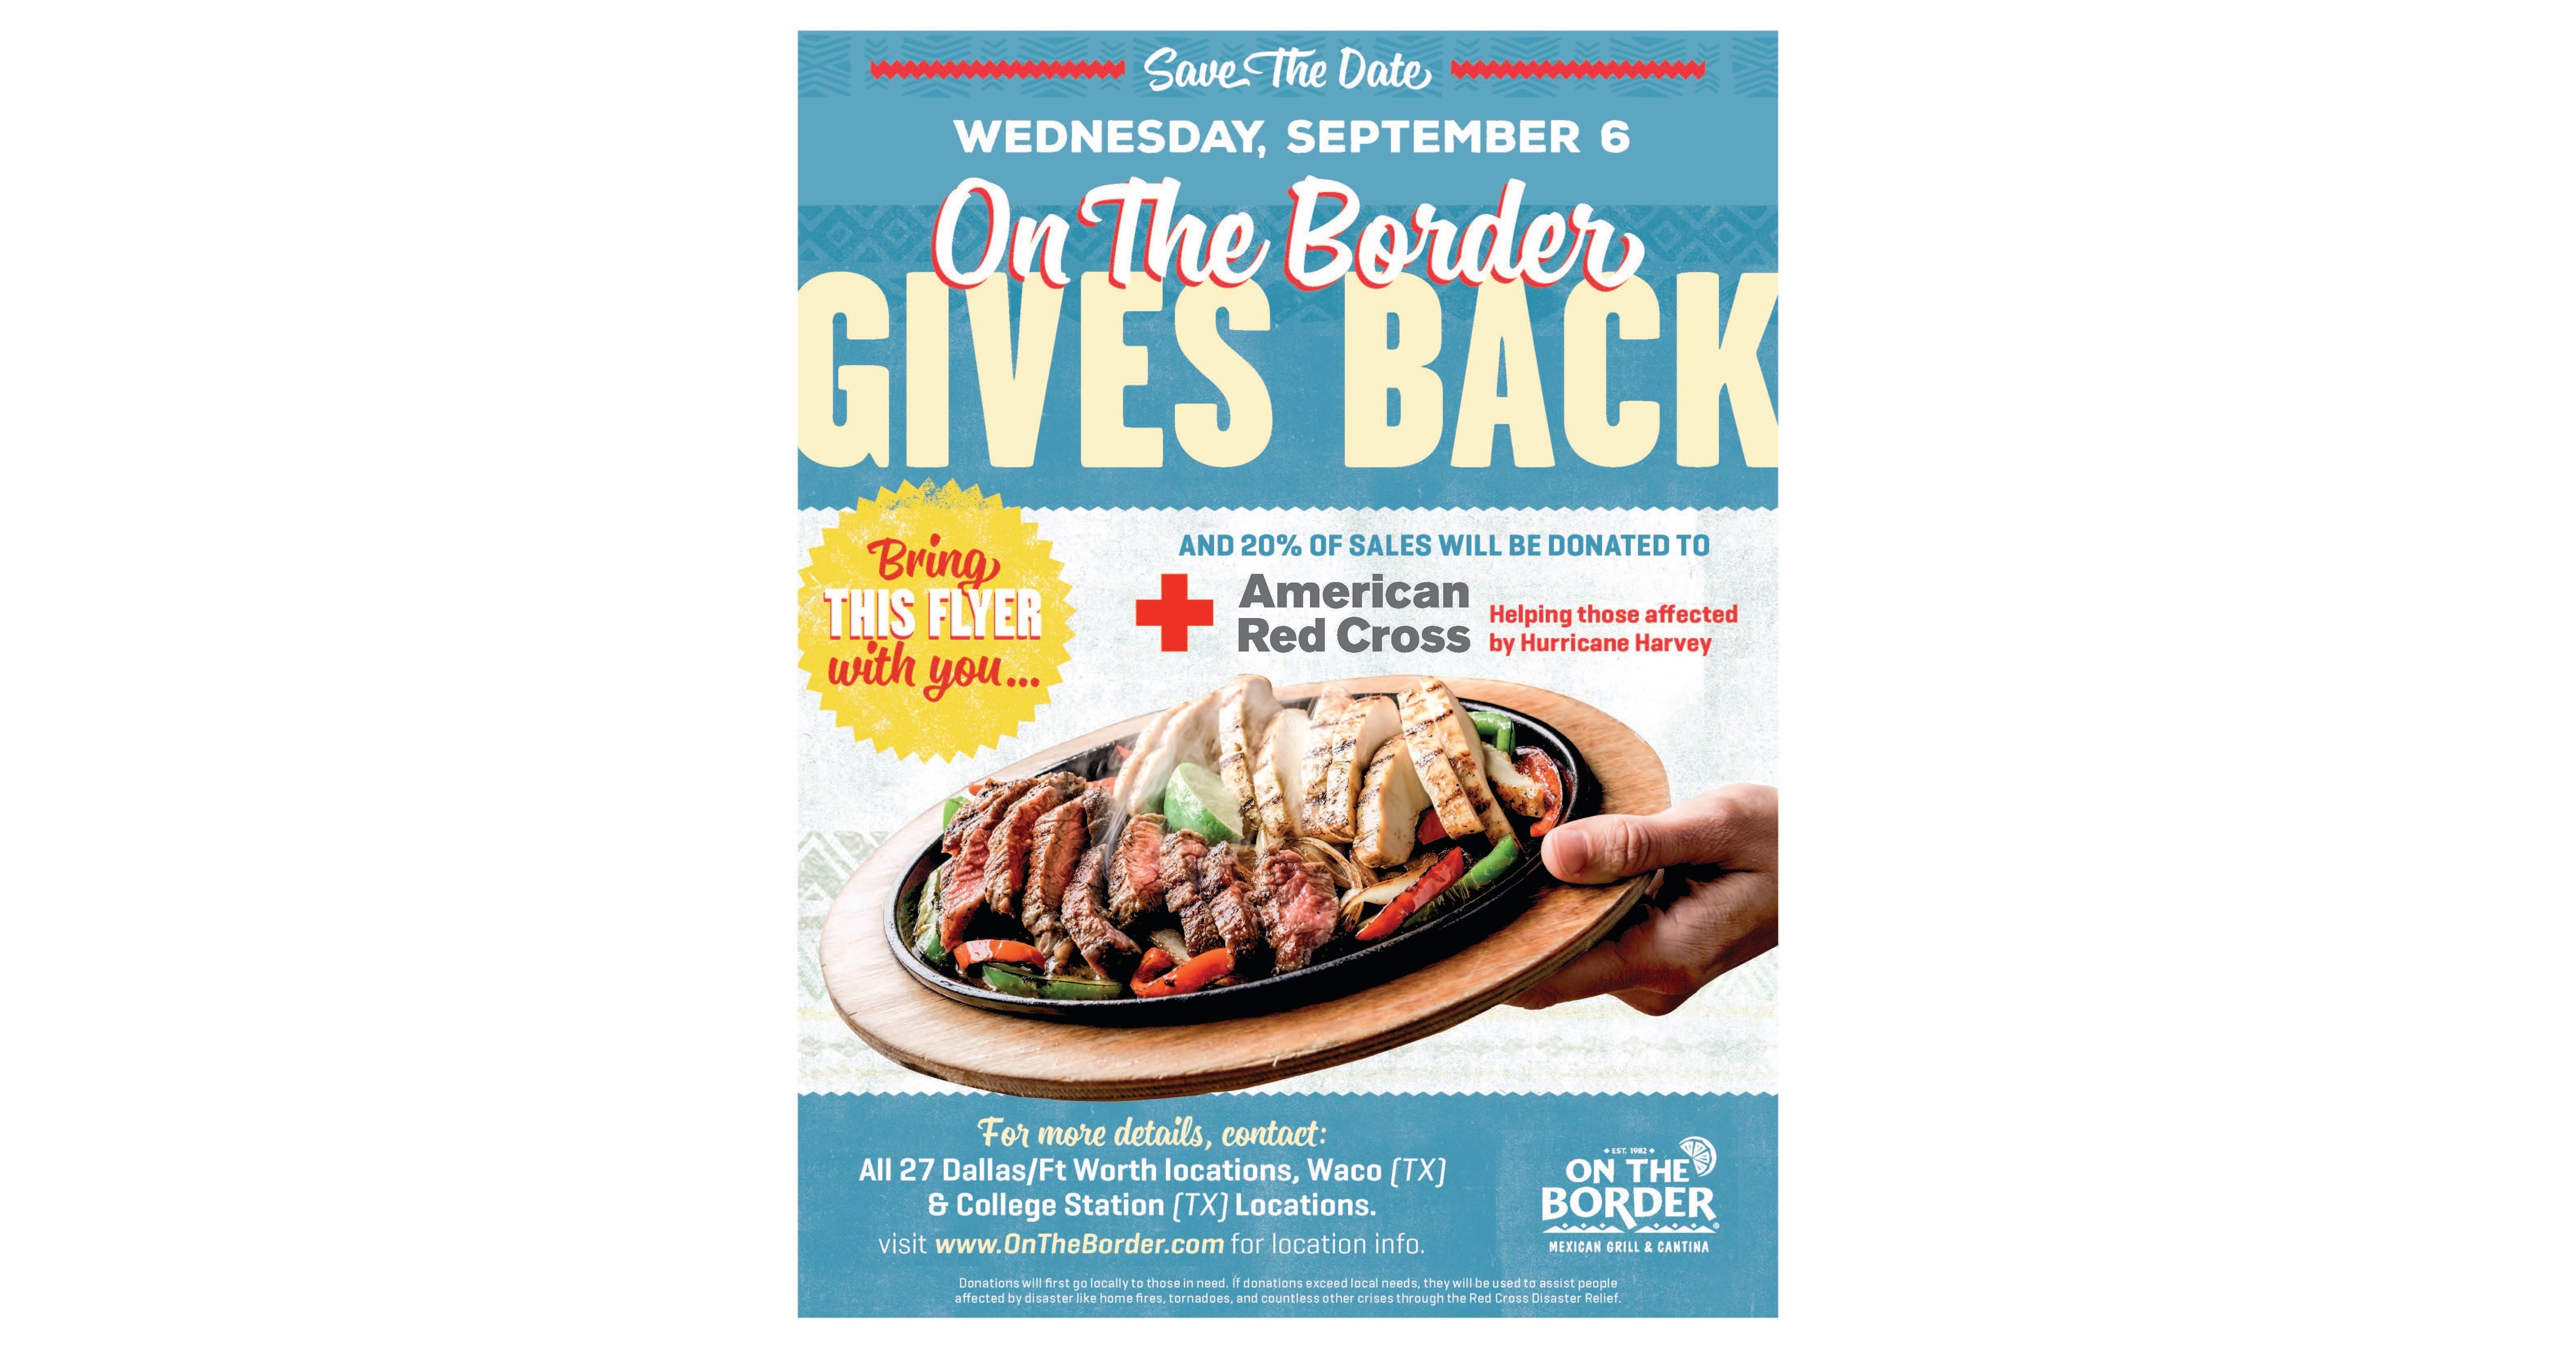 On The Border Restaurants Offer to Donate 20% of Guest Checks on Sept